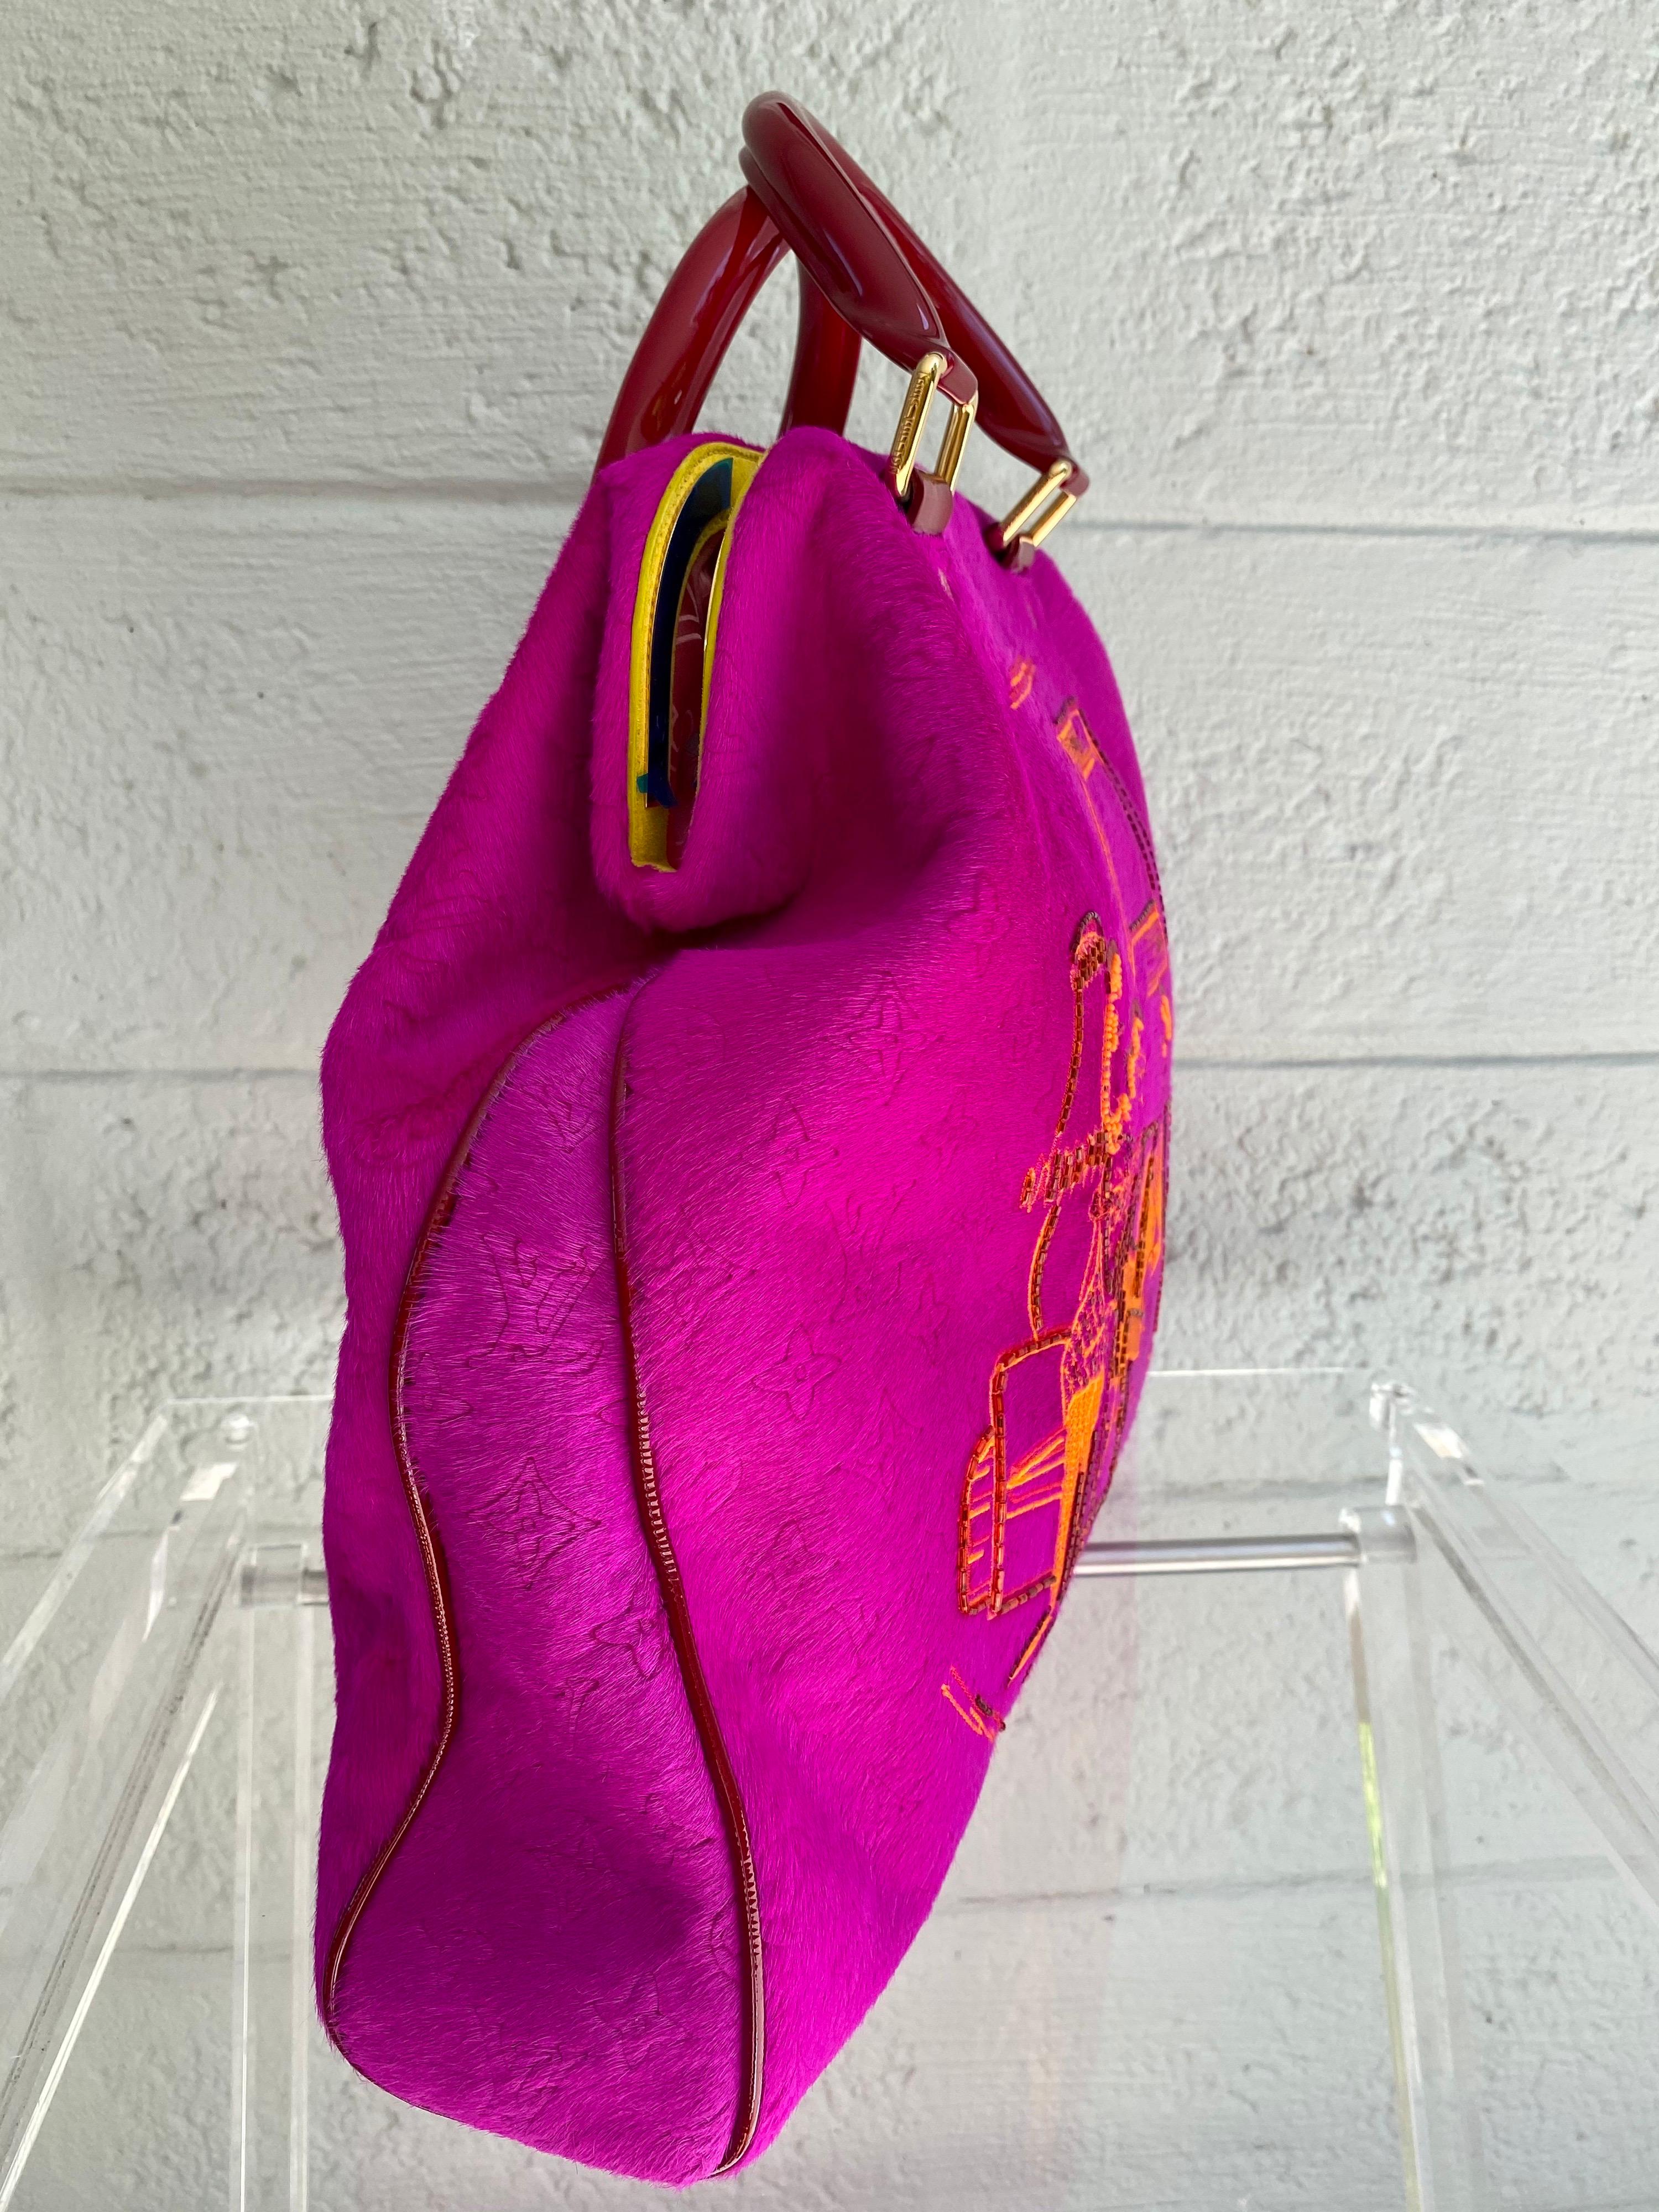 The extremely rare LOUIS VUITTON Fuchsia Cartoon Firebird, the most luxurious of them all. One of a kind and only a few were released Worldwide in 2008! Cartoon Limited Collection bag is part of the Spring 2008 Monogram Motard Collection. The